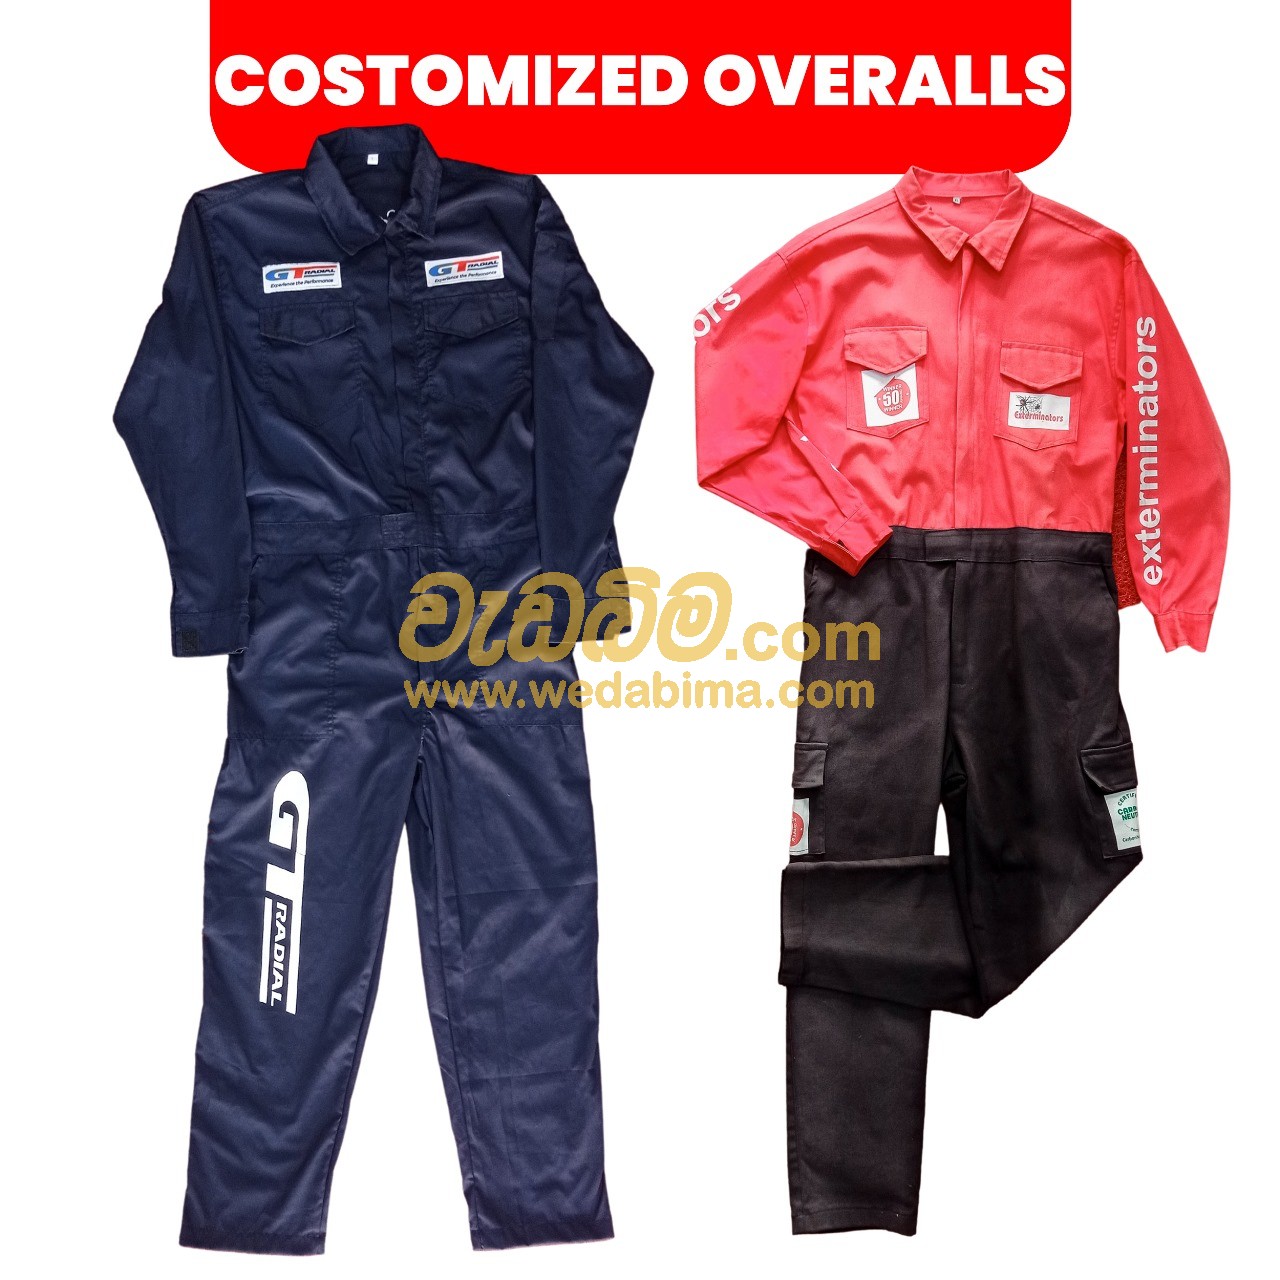 Industrial Overall Kit